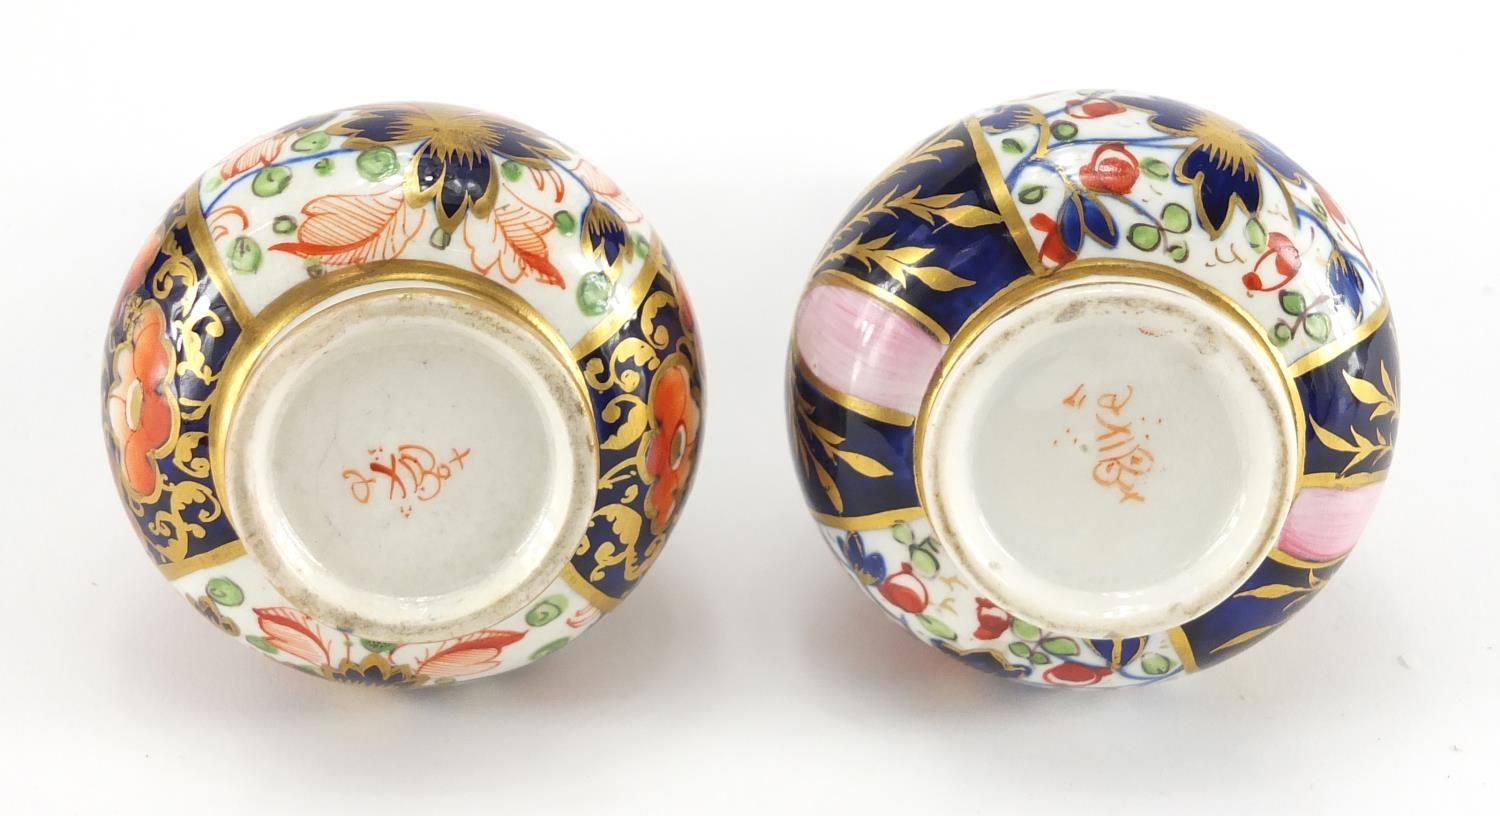 Two 19th century Derby porcelain bottle vases, hand painted and gilded in the Imari palette, painted - Image 5 of 7